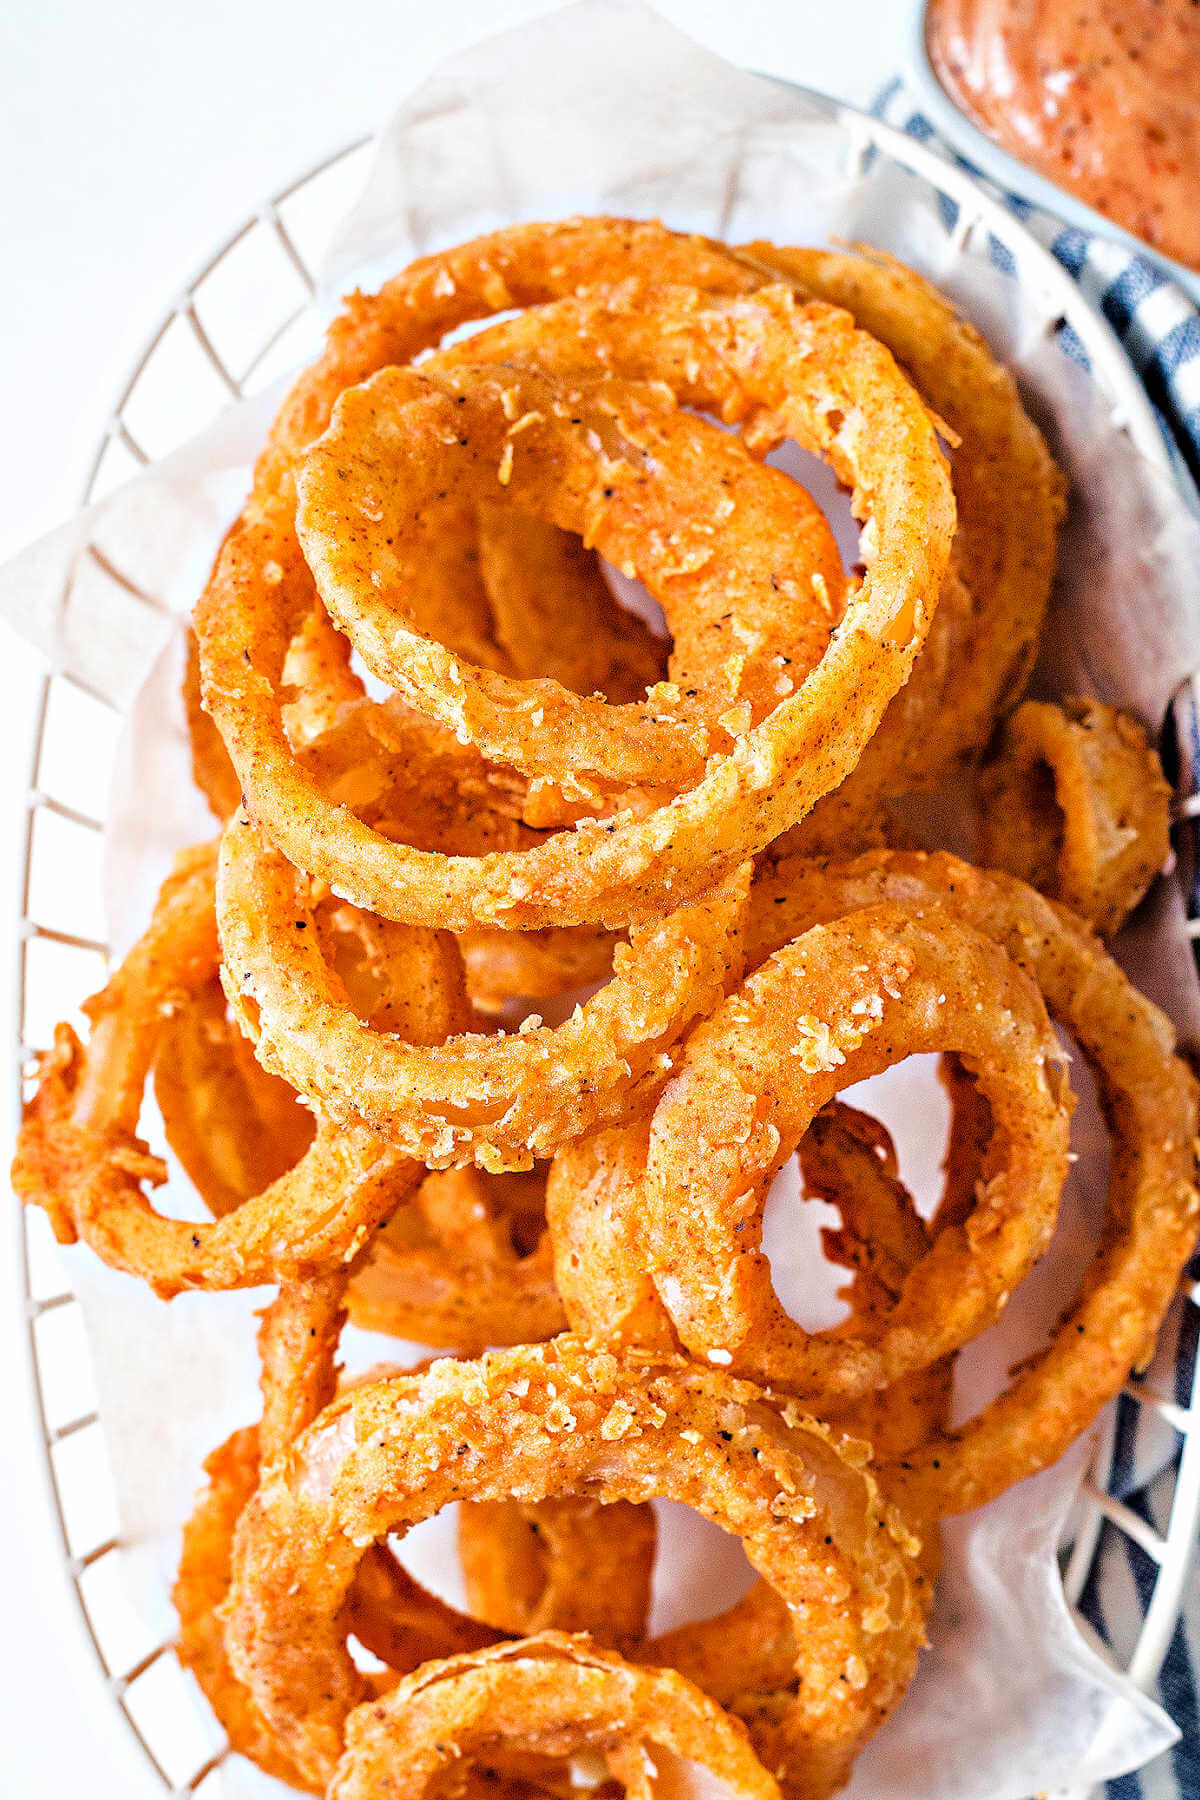 a basket of fried onion rings on a table.